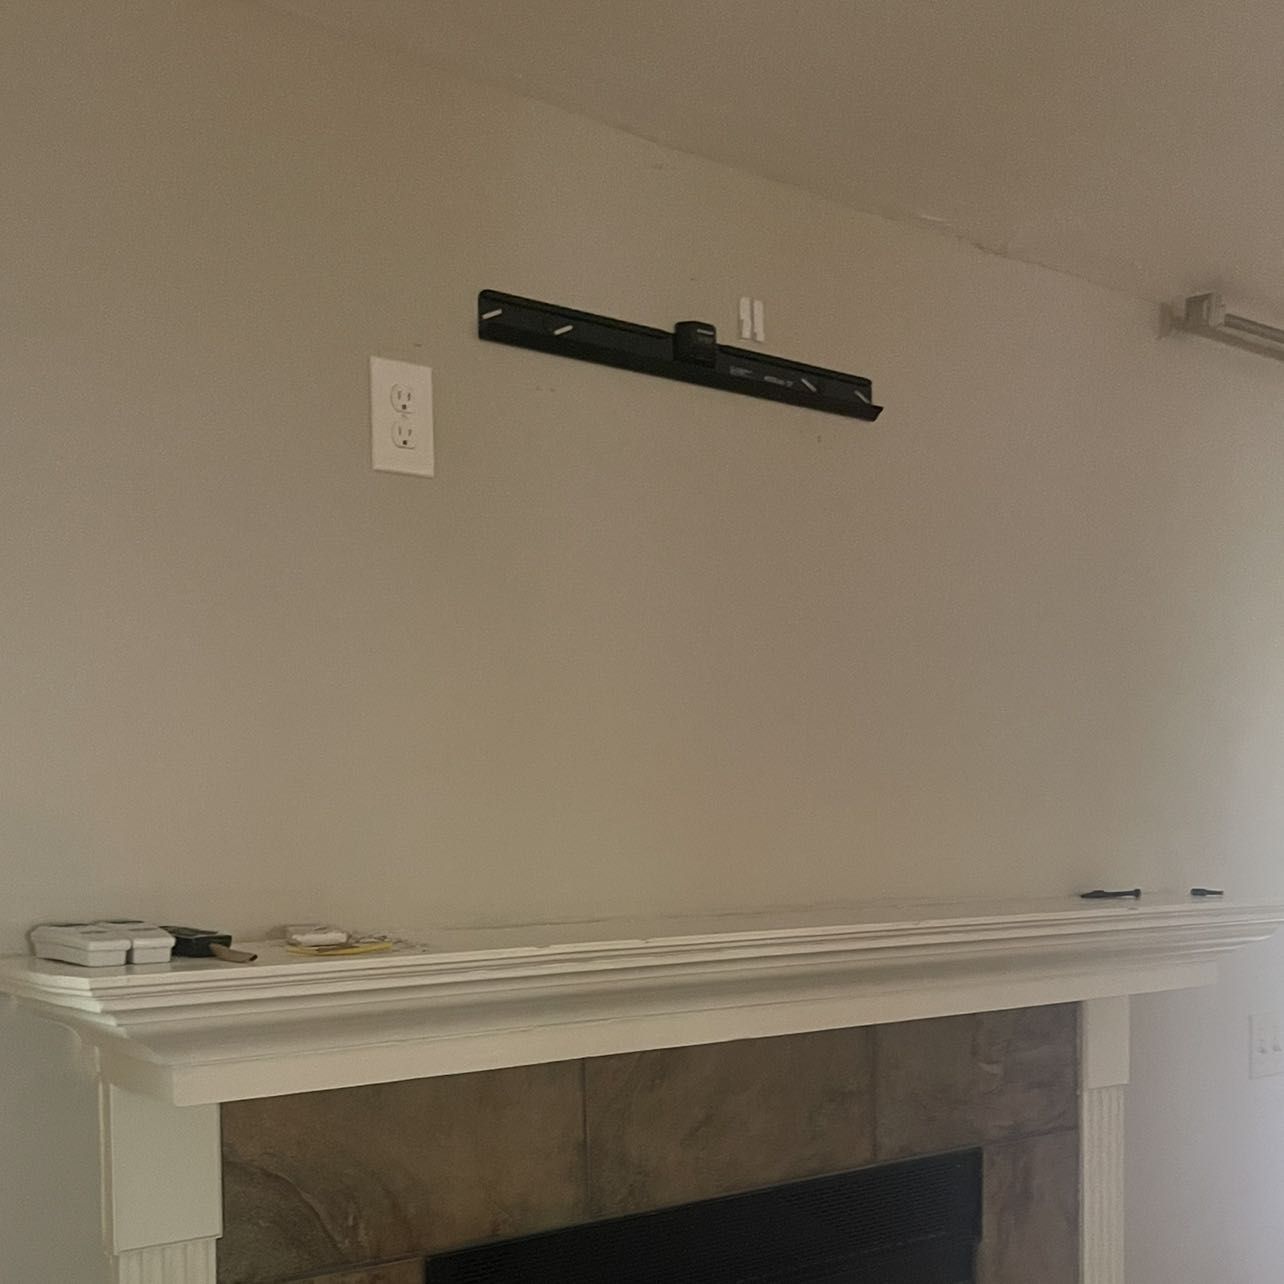 No cords/ power outlet added behind tv portfolio